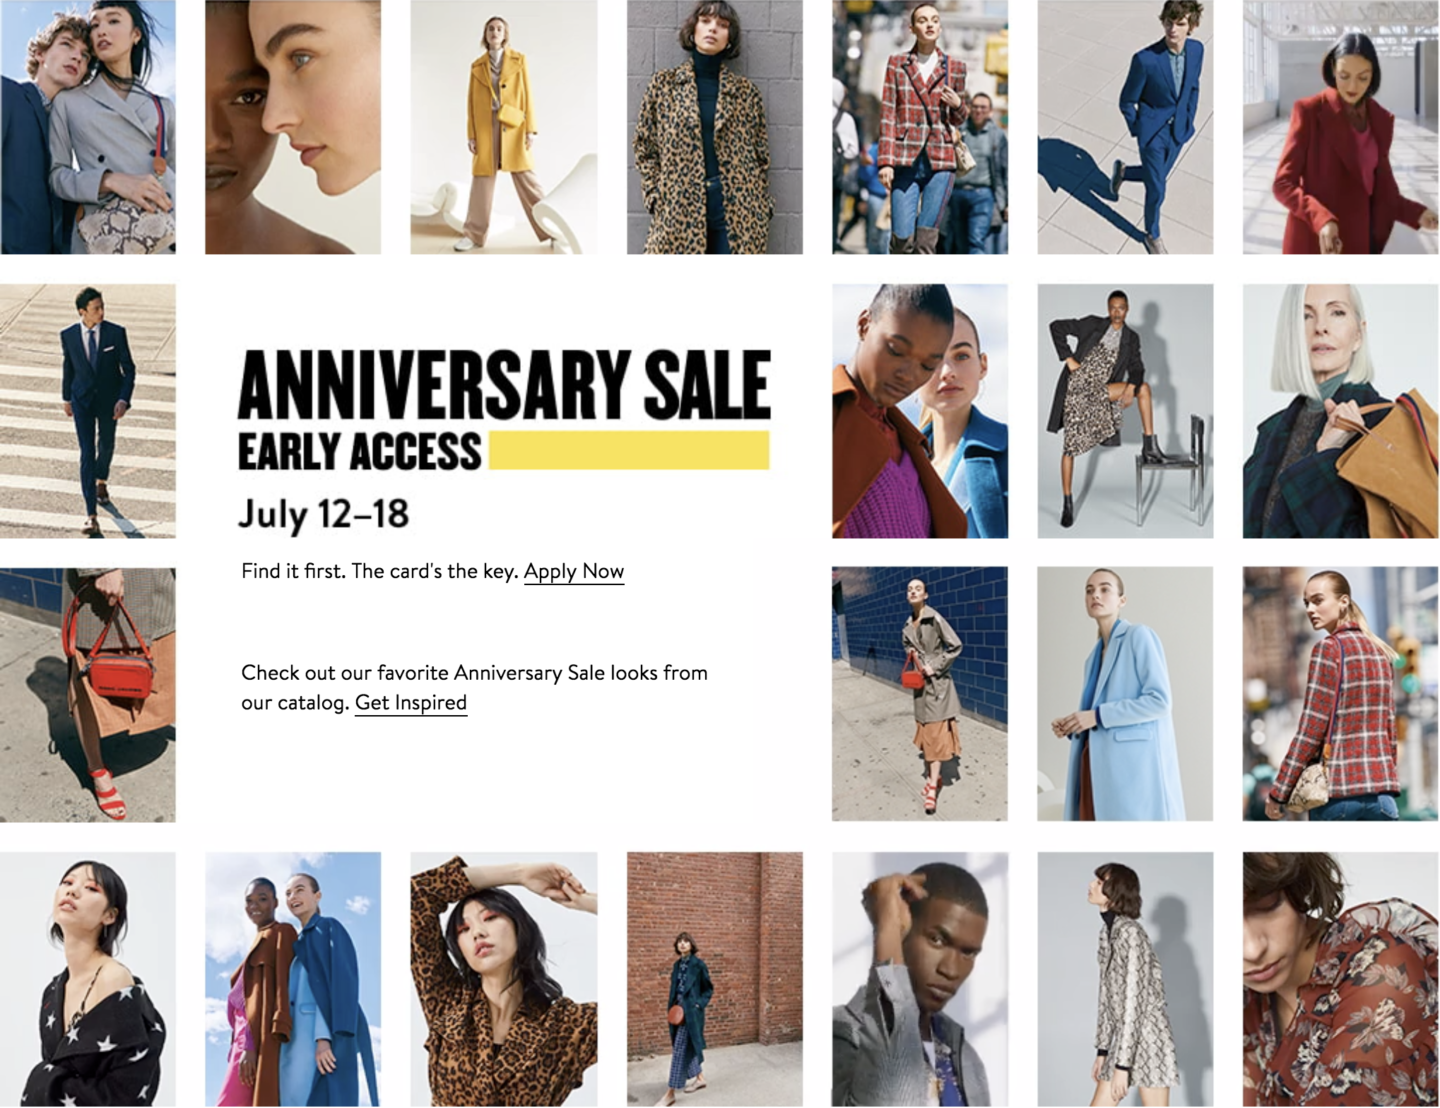 Nordstrom Anniversary Sale Early Access info